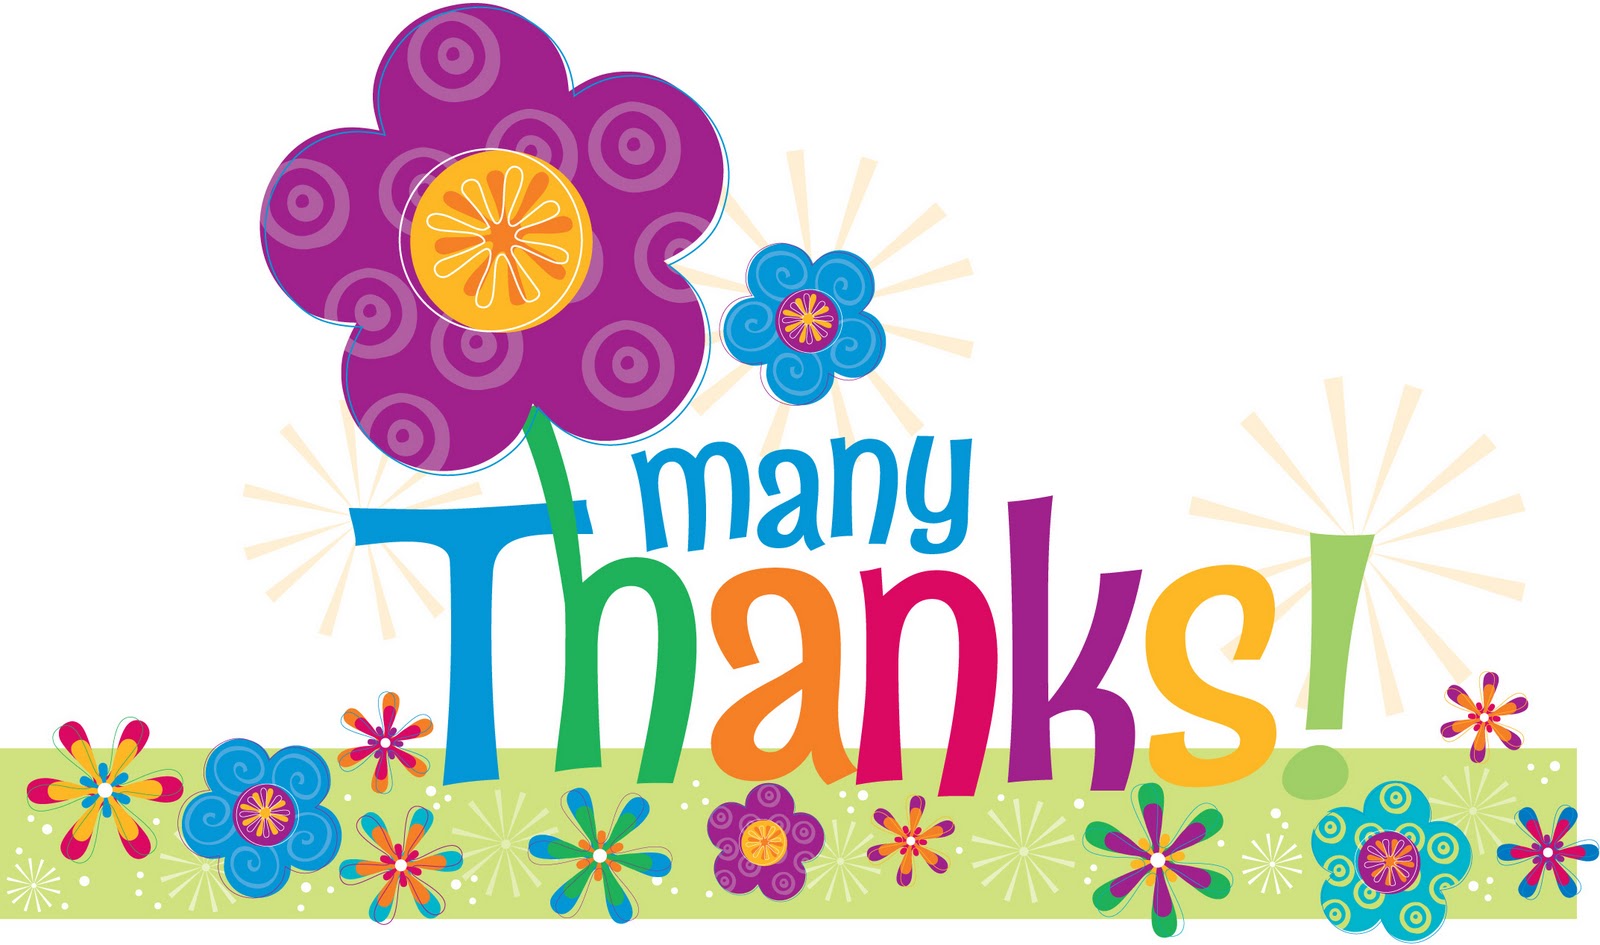 free thank you clipart images - photo #38